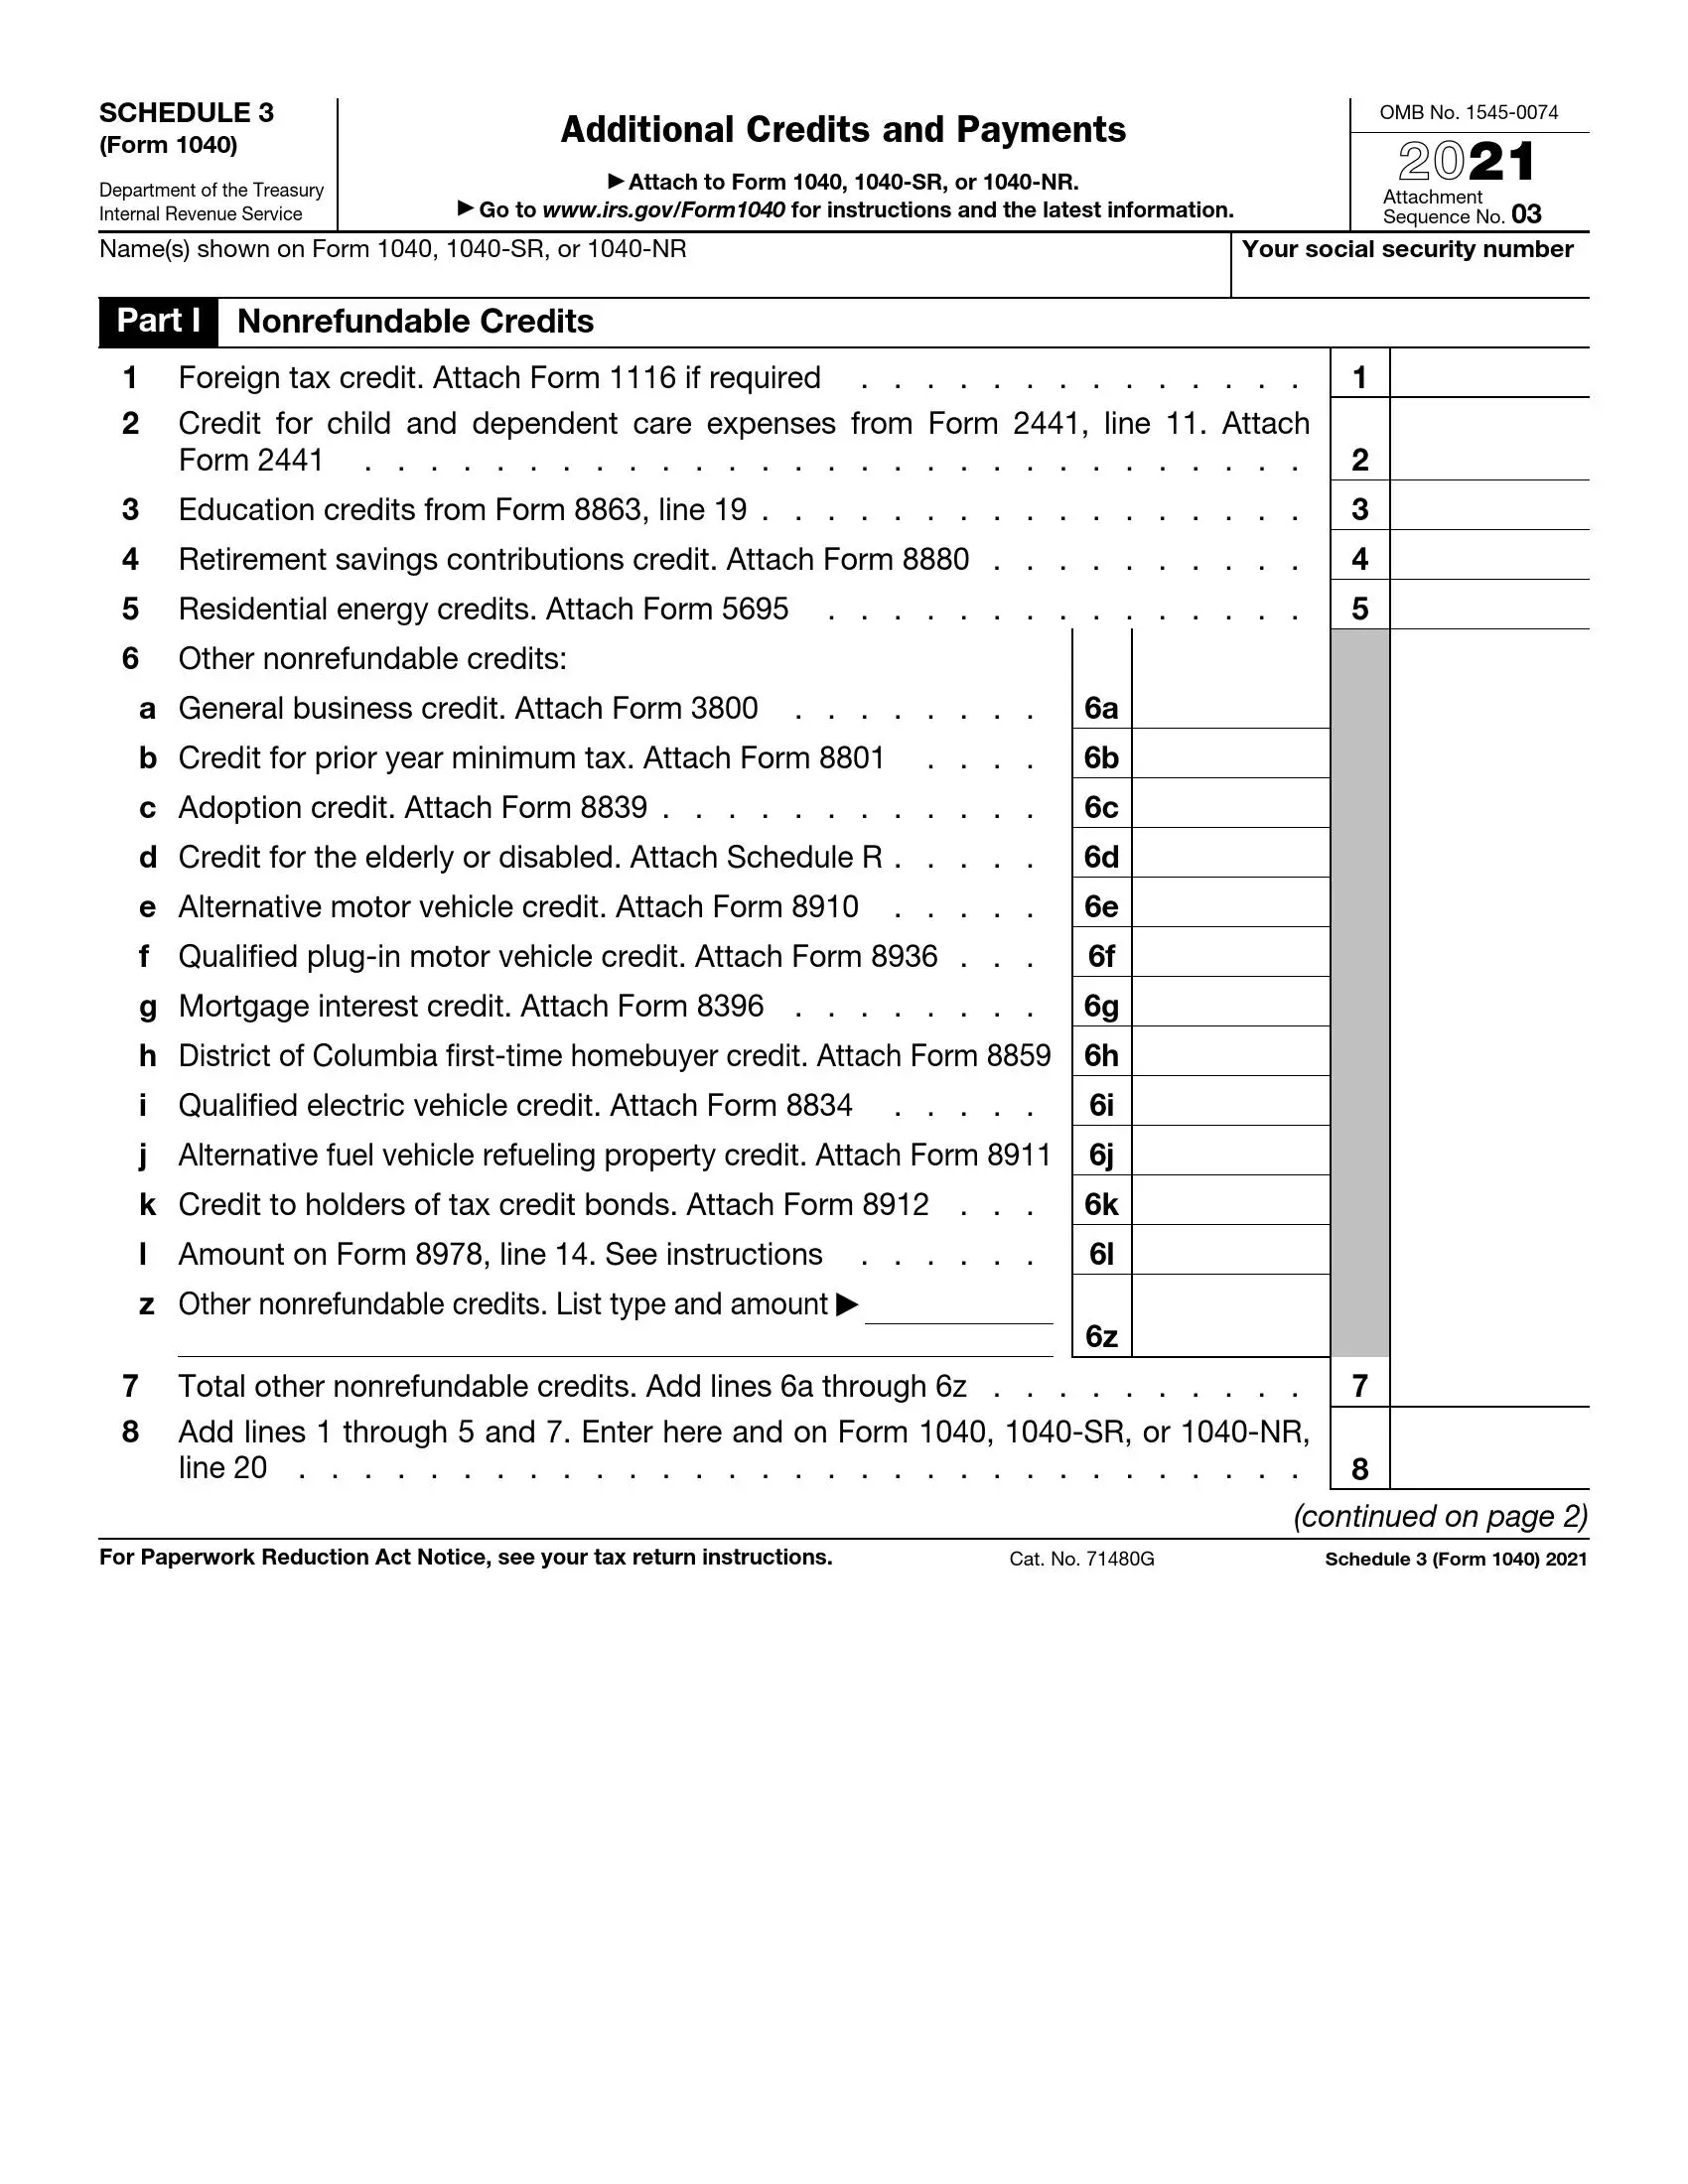 irs schedule 3 form 1040 or 1040-sr 2021 preview